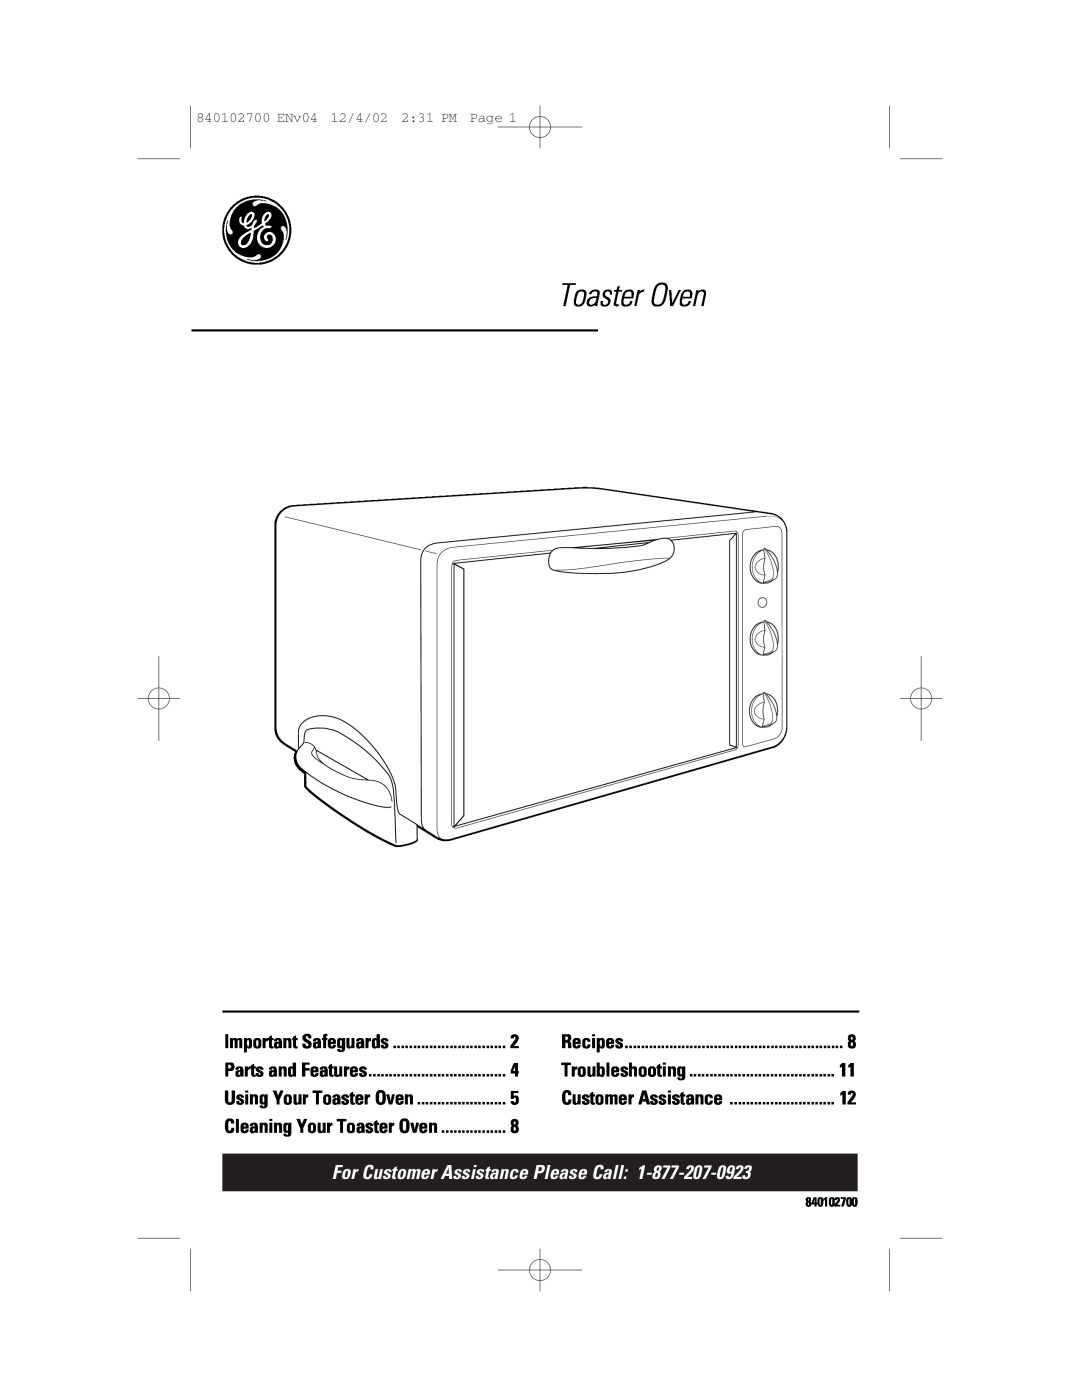 GE 106686 manual Toaster Oven, For Customer Assistance Please Call, Important Safeguards, Recipes, Parts and Features 